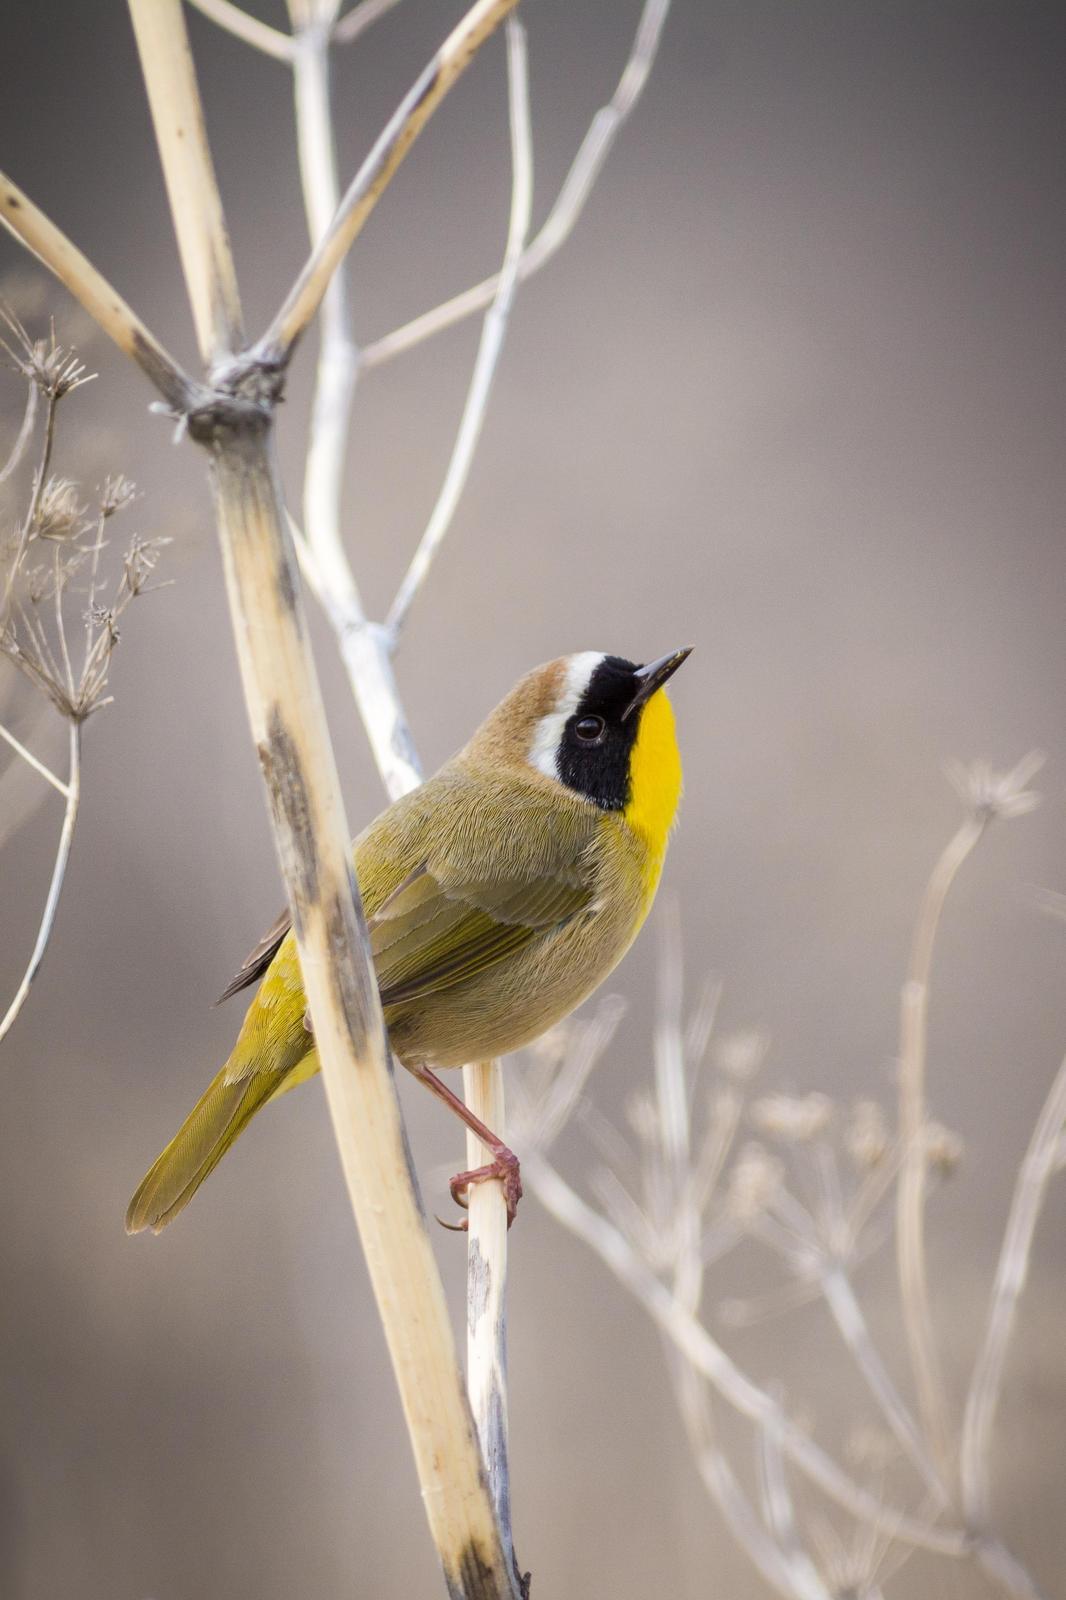 Common Yellowthroat Photo by Jesse Hodges